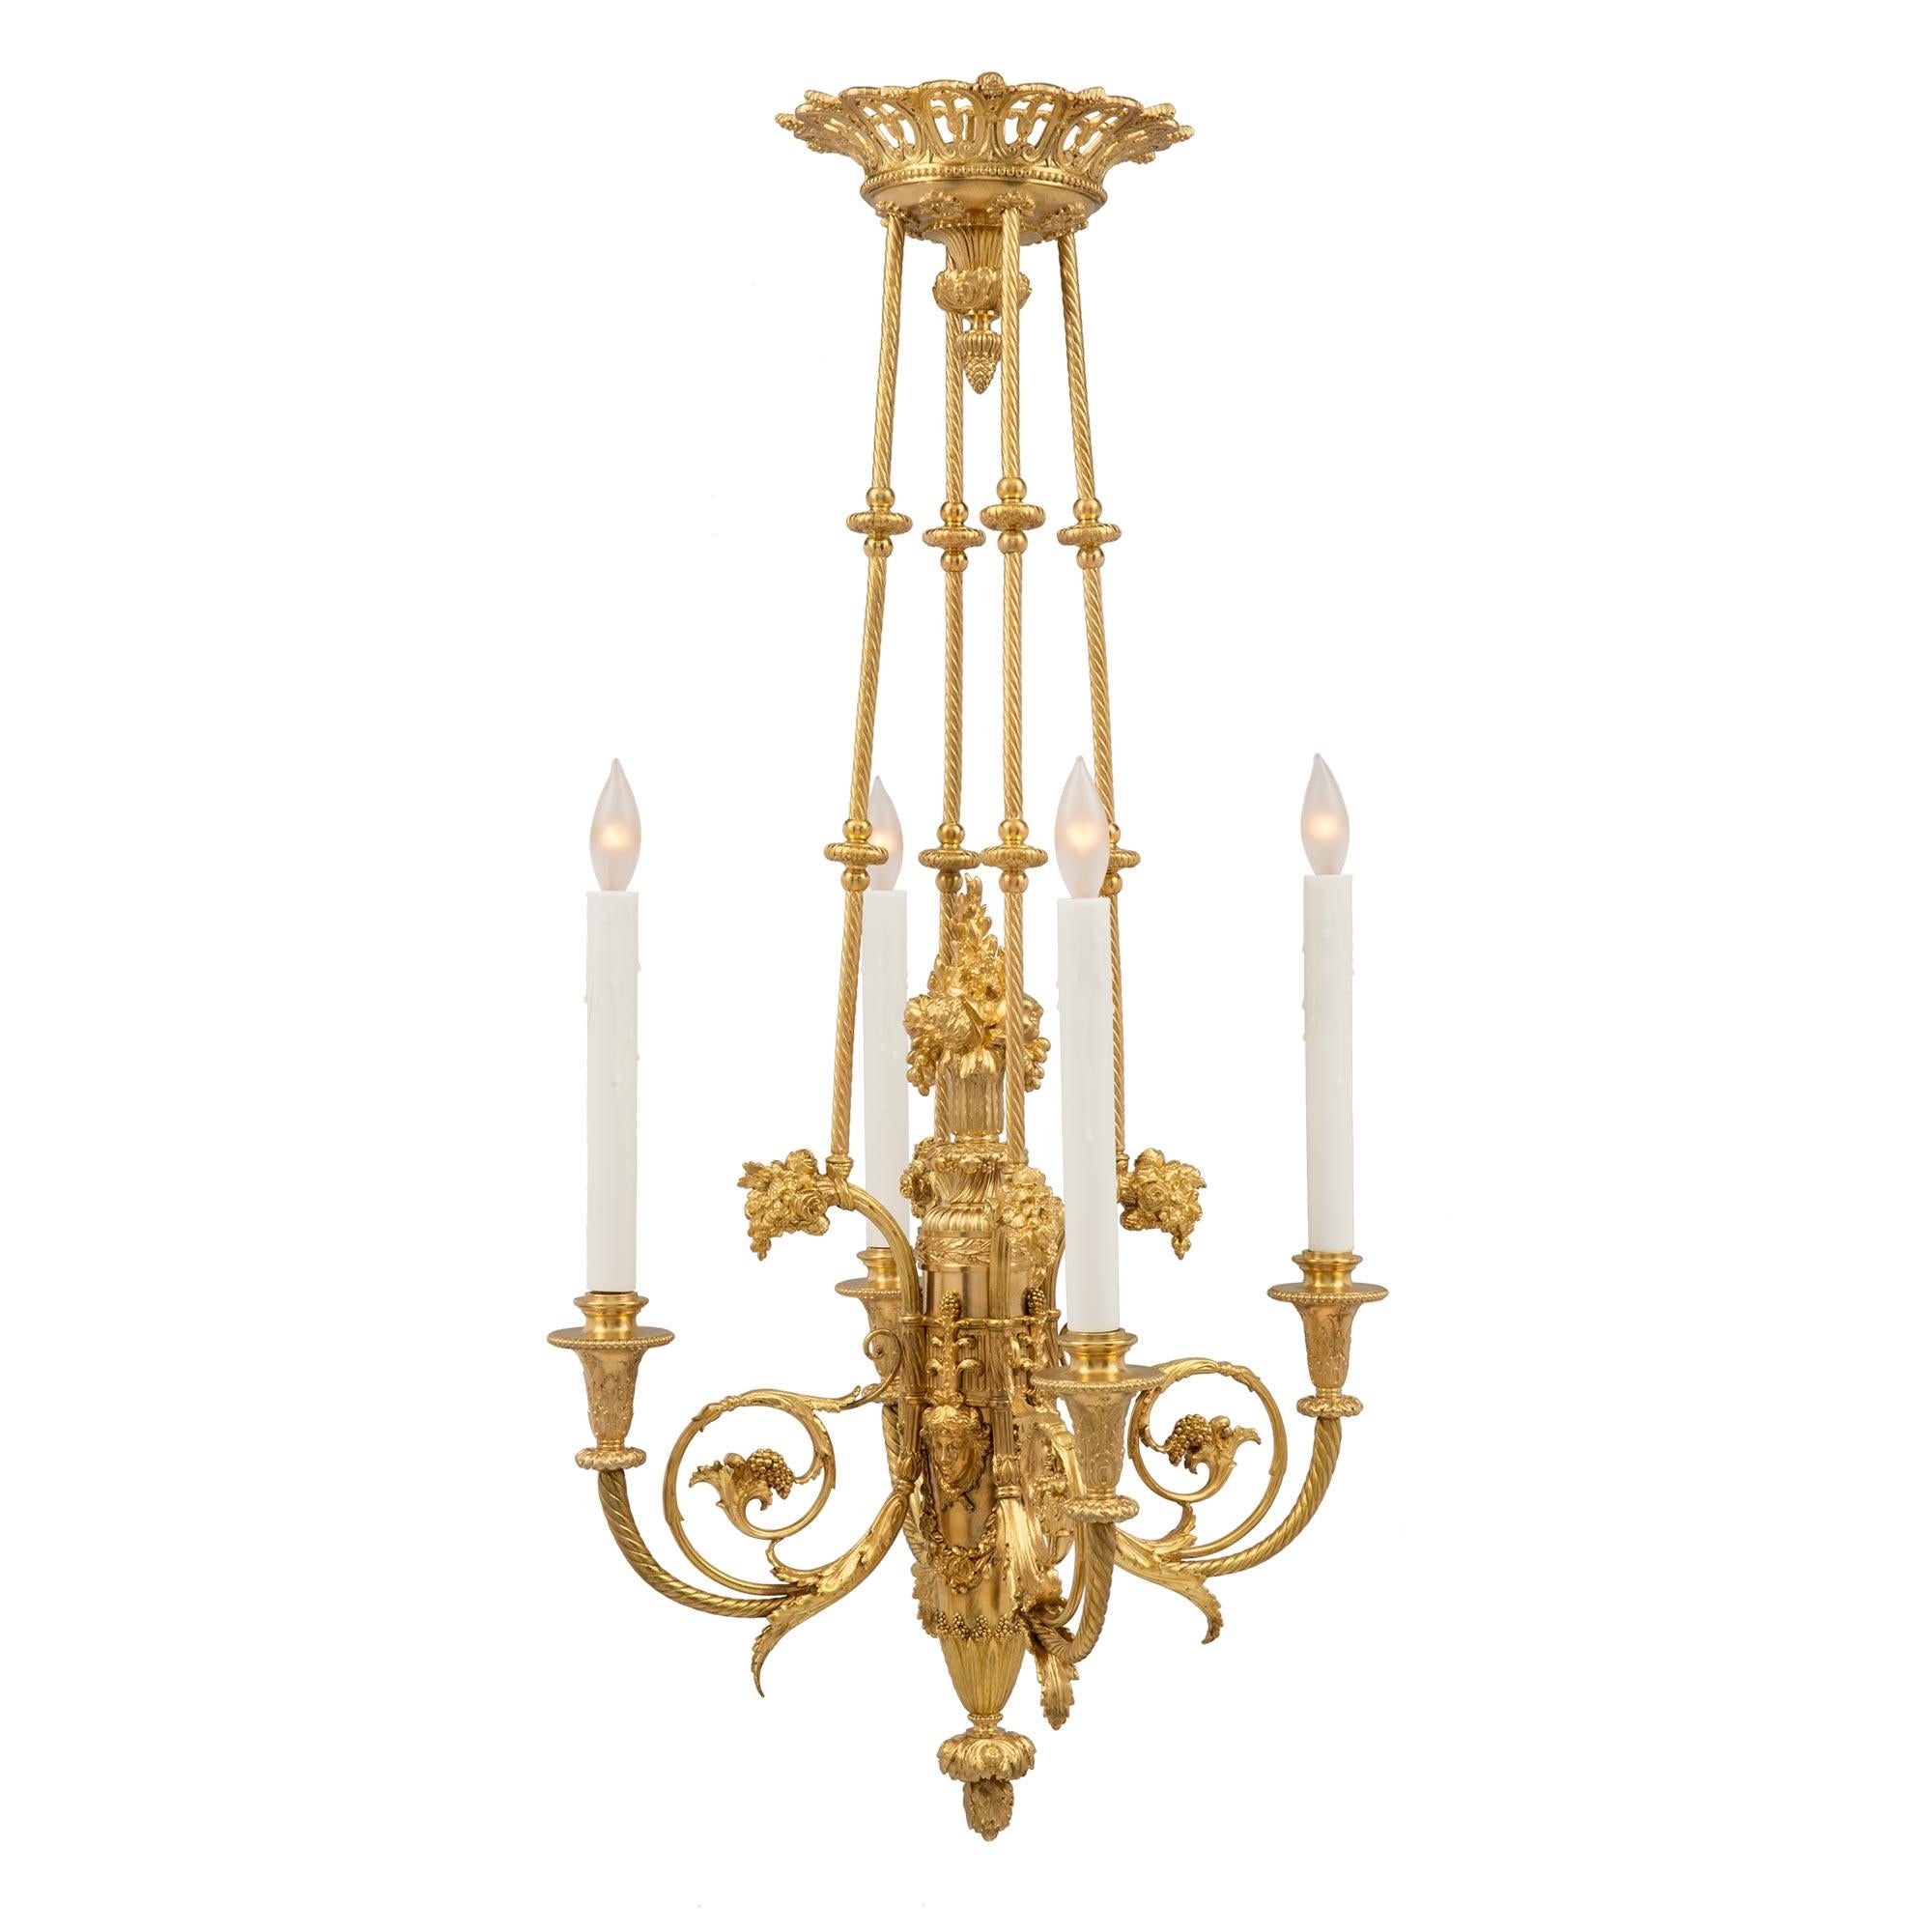 French 19th Century Louis XVI Style Chandelier, Signed F. Barbedienne, Paris In Good Condition For Sale In West Palm Beach, FL